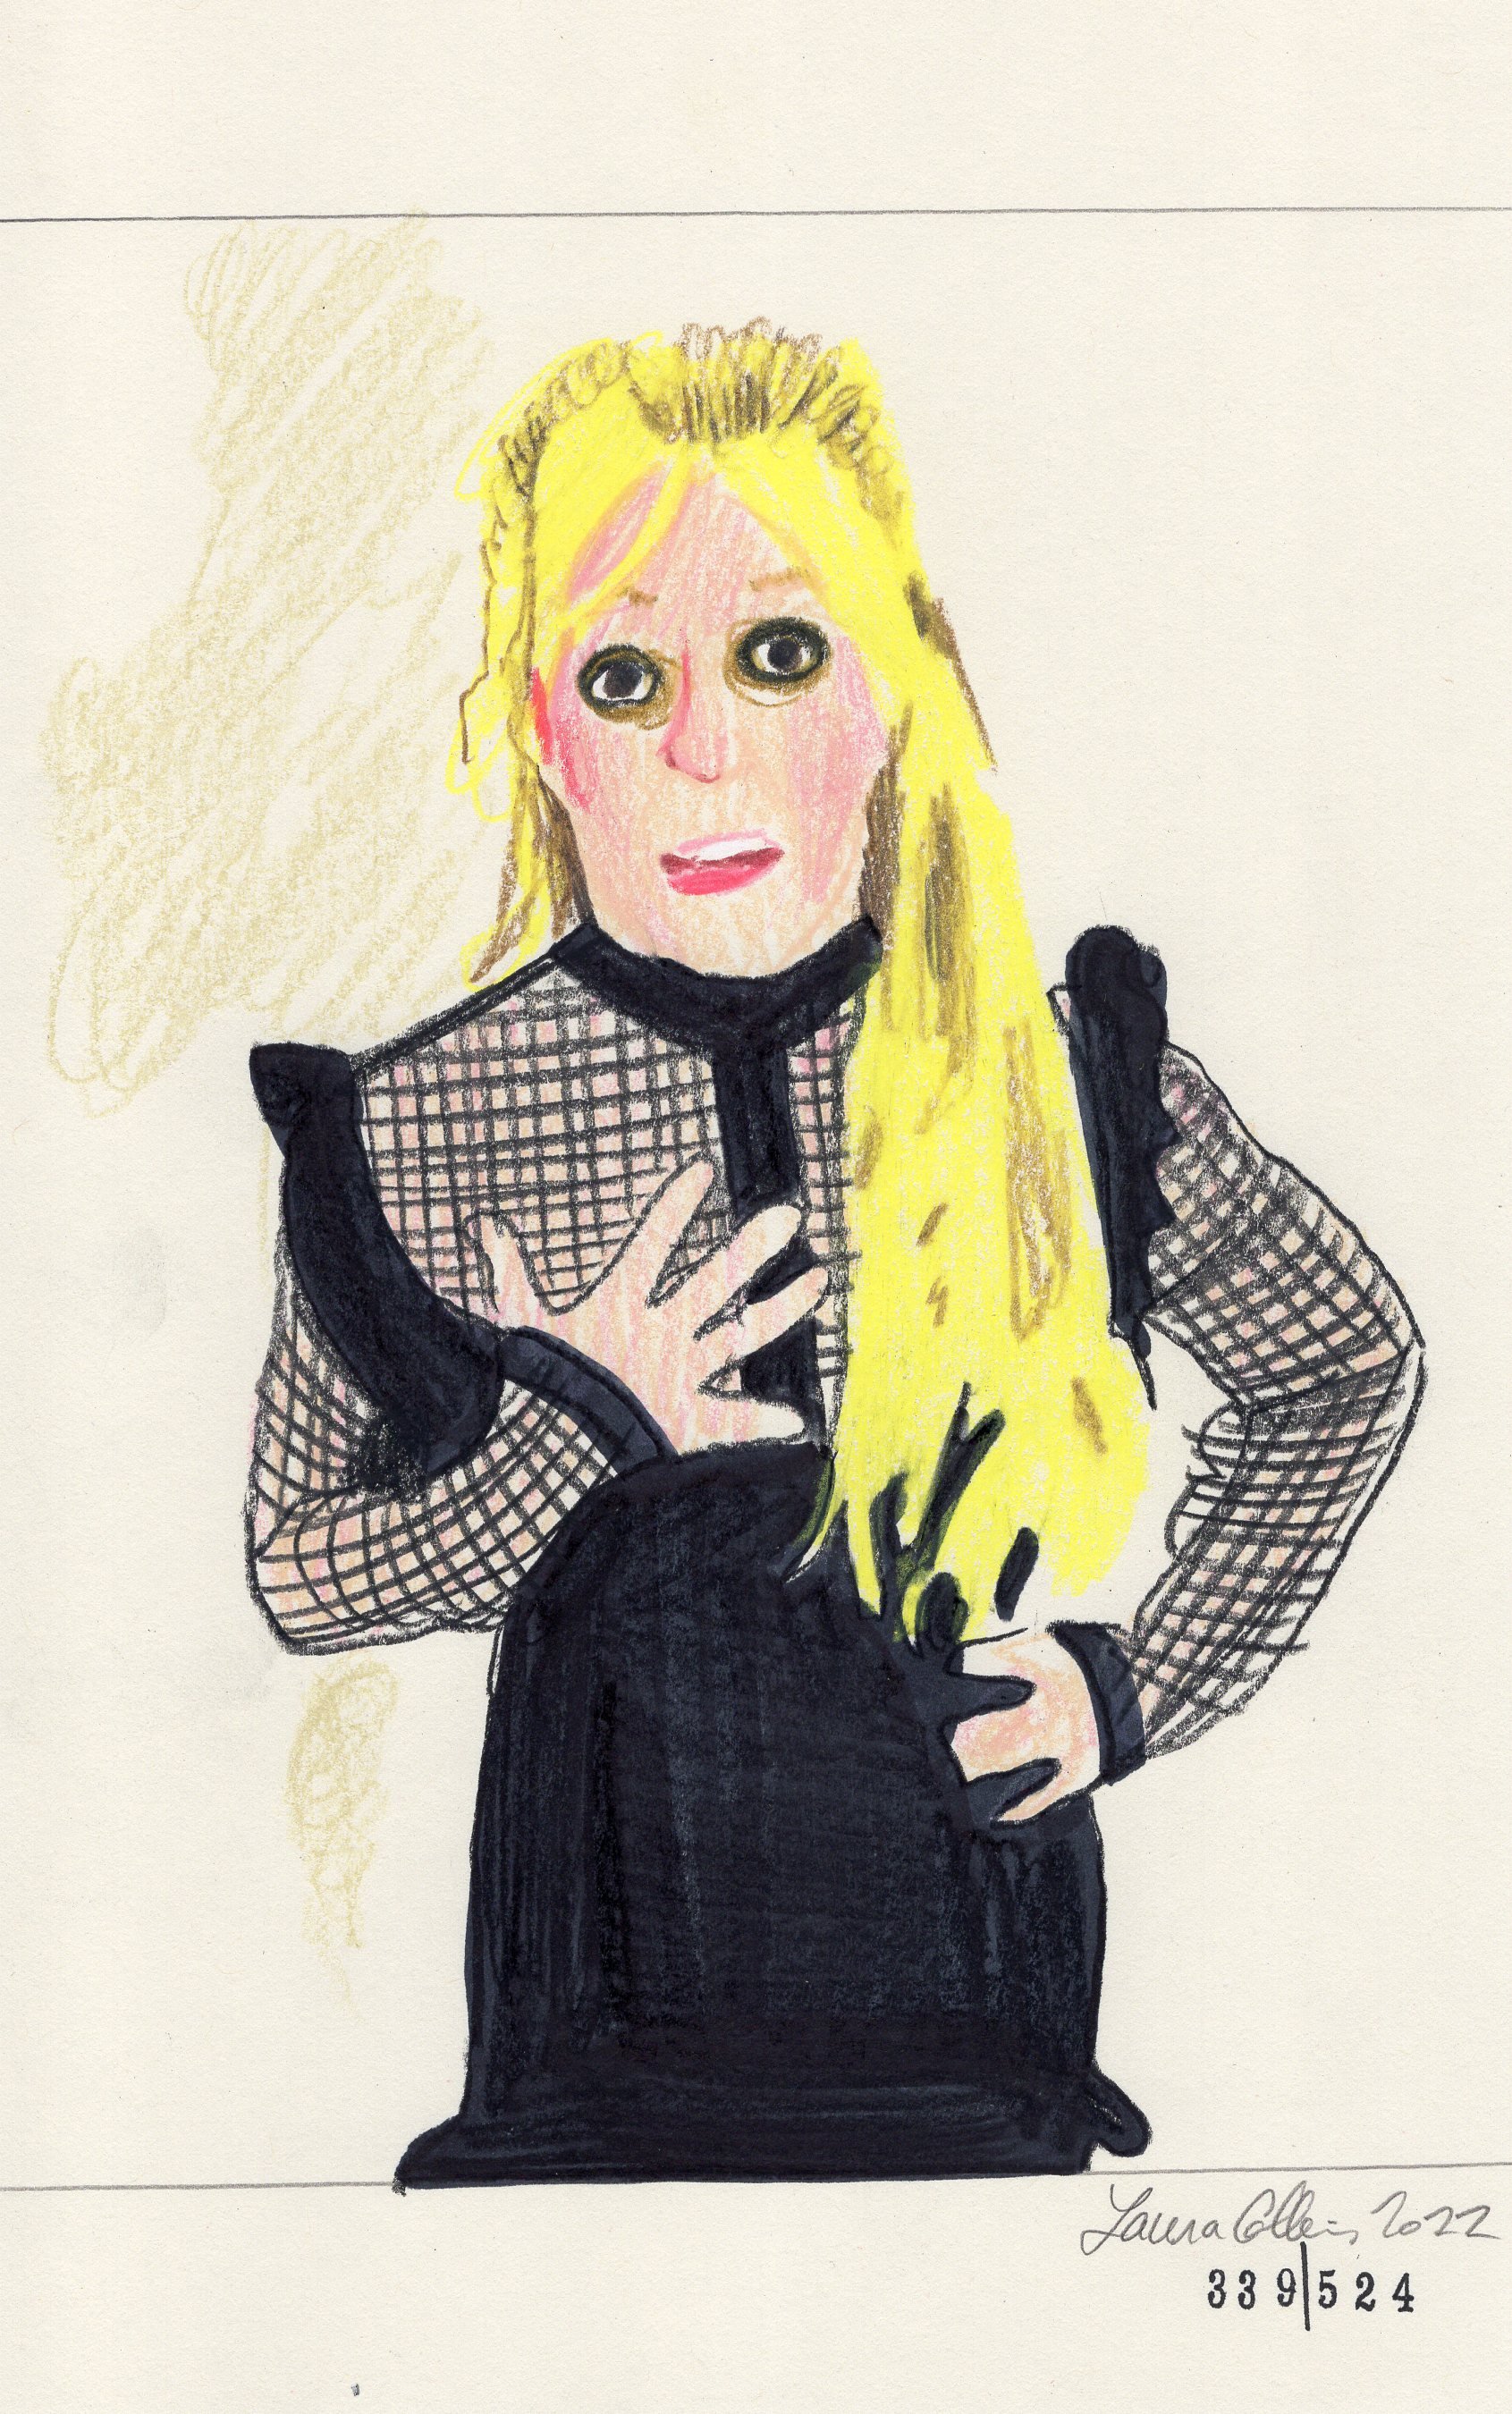 Laura Collins Britney Spears Animation 6x9in mixed media 2022 no339.jpg